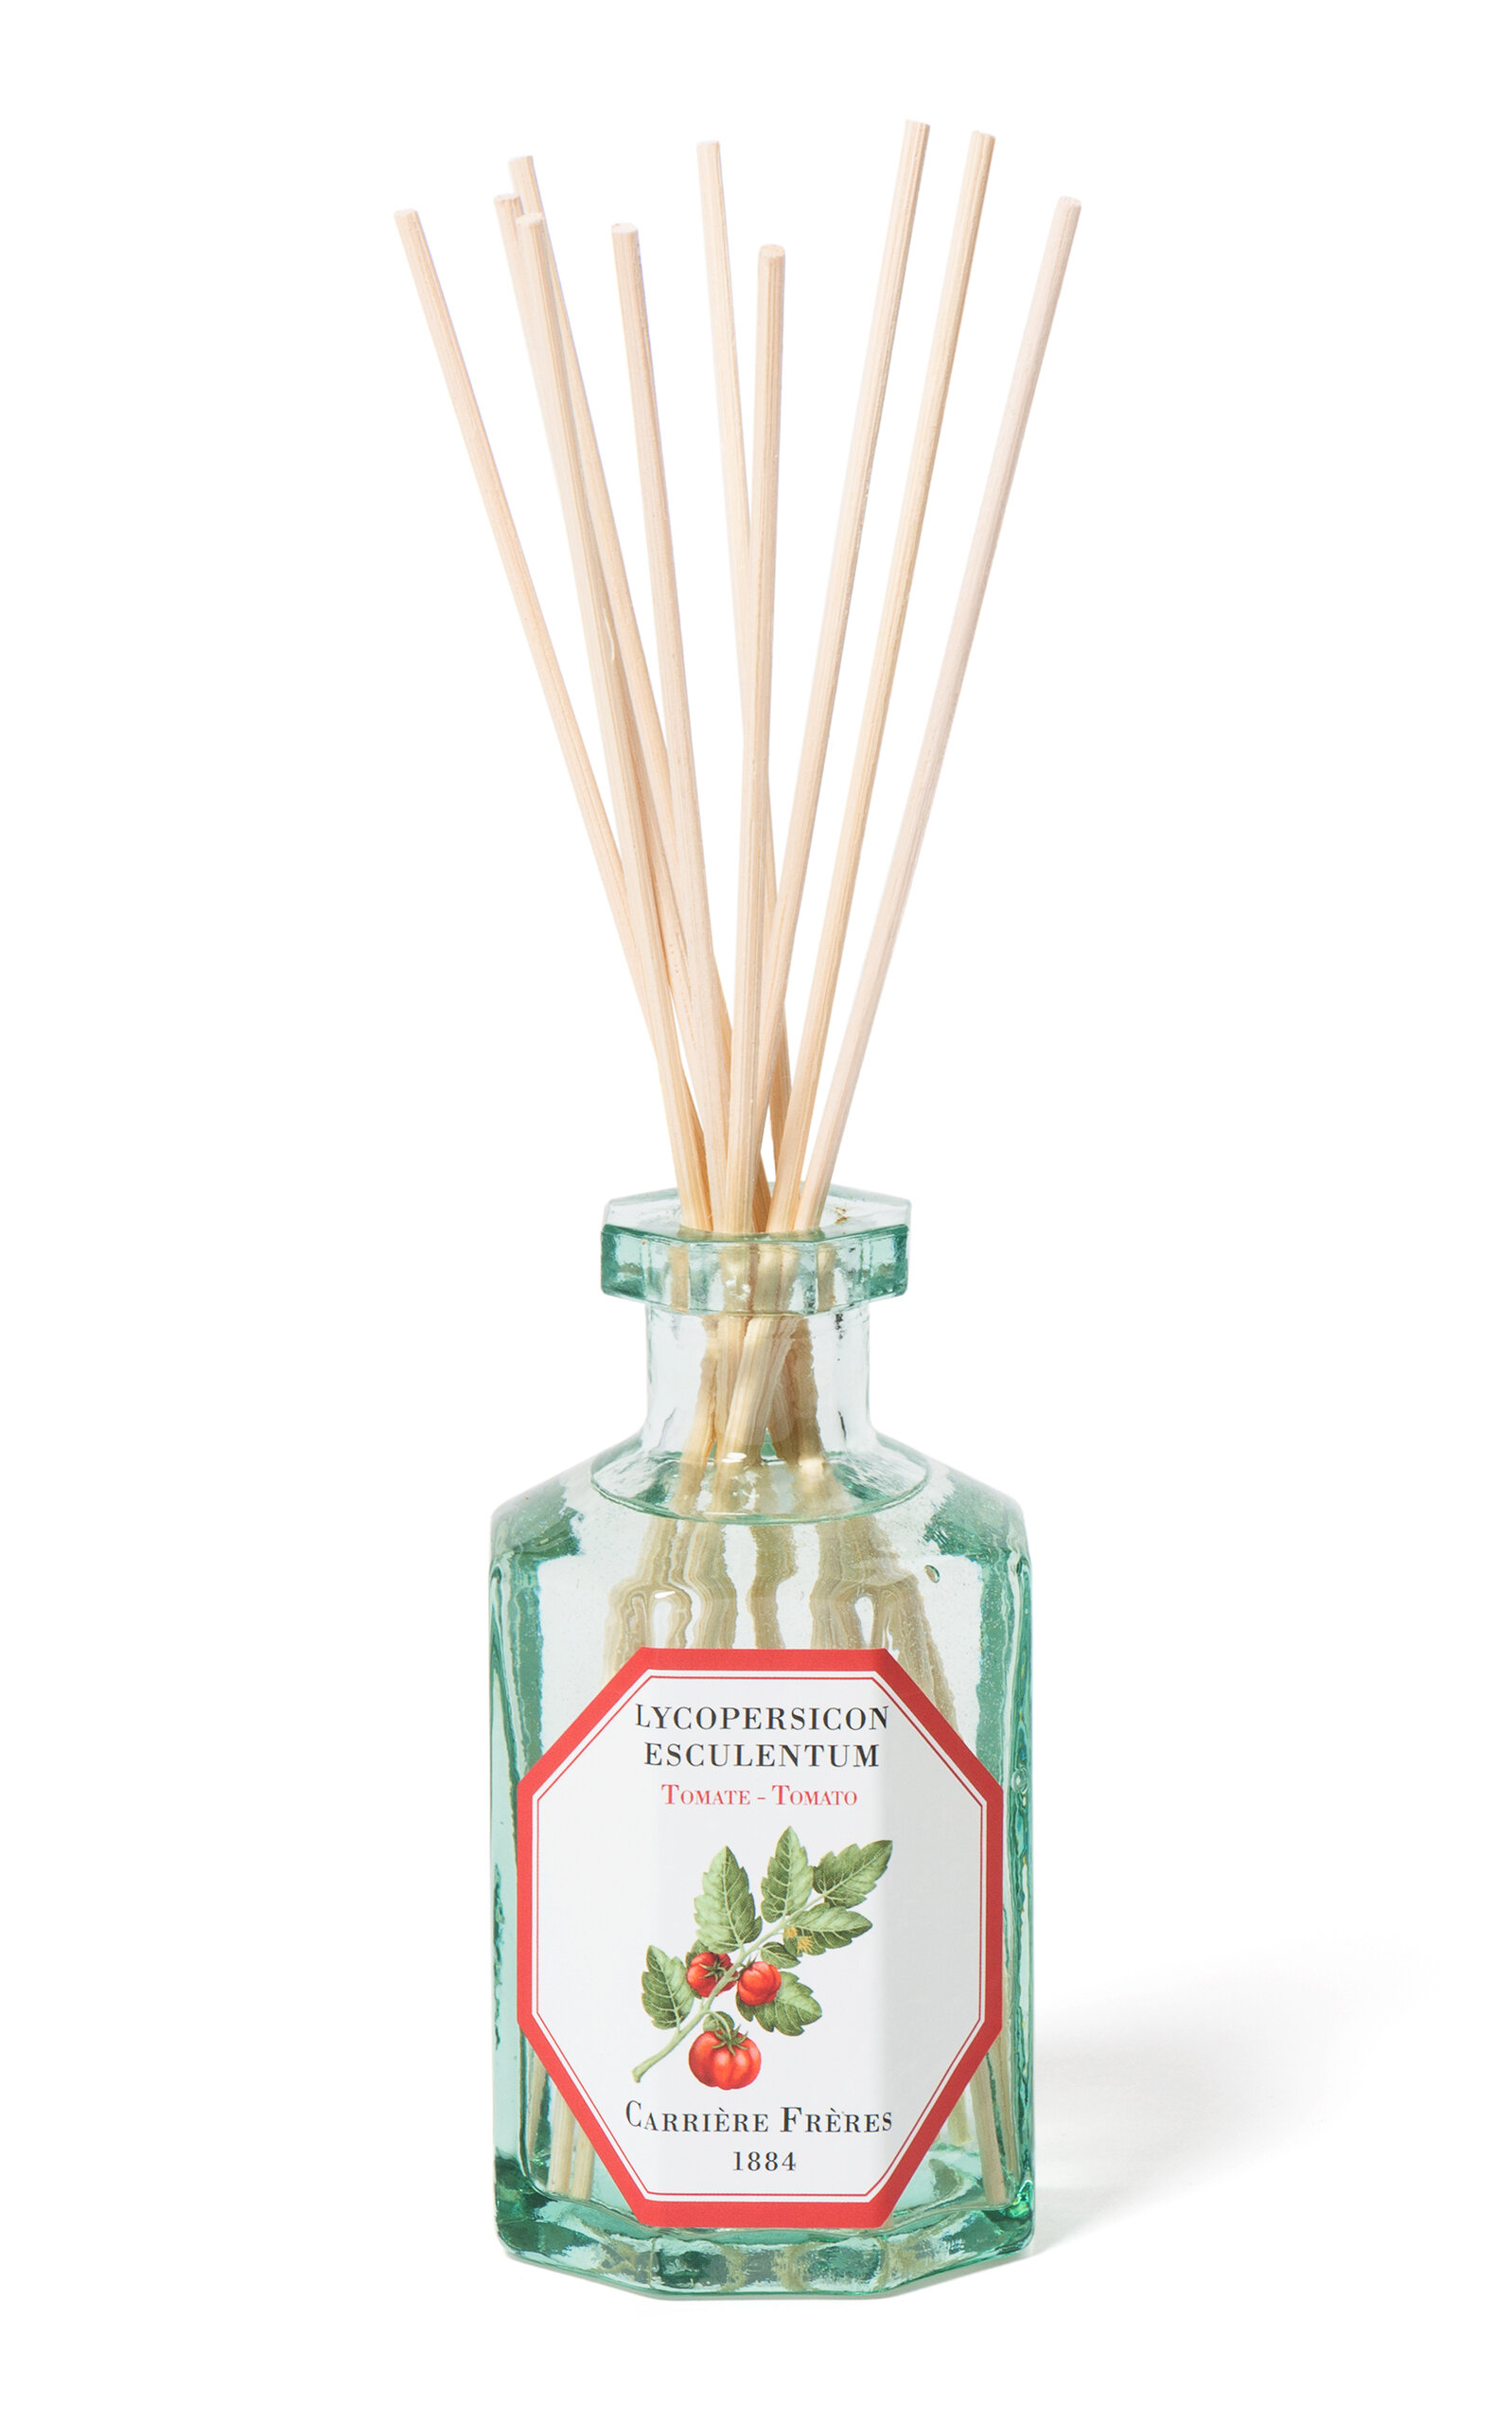 Carriere Freres Lycopersicon Esculentum Diffuser In Neutral